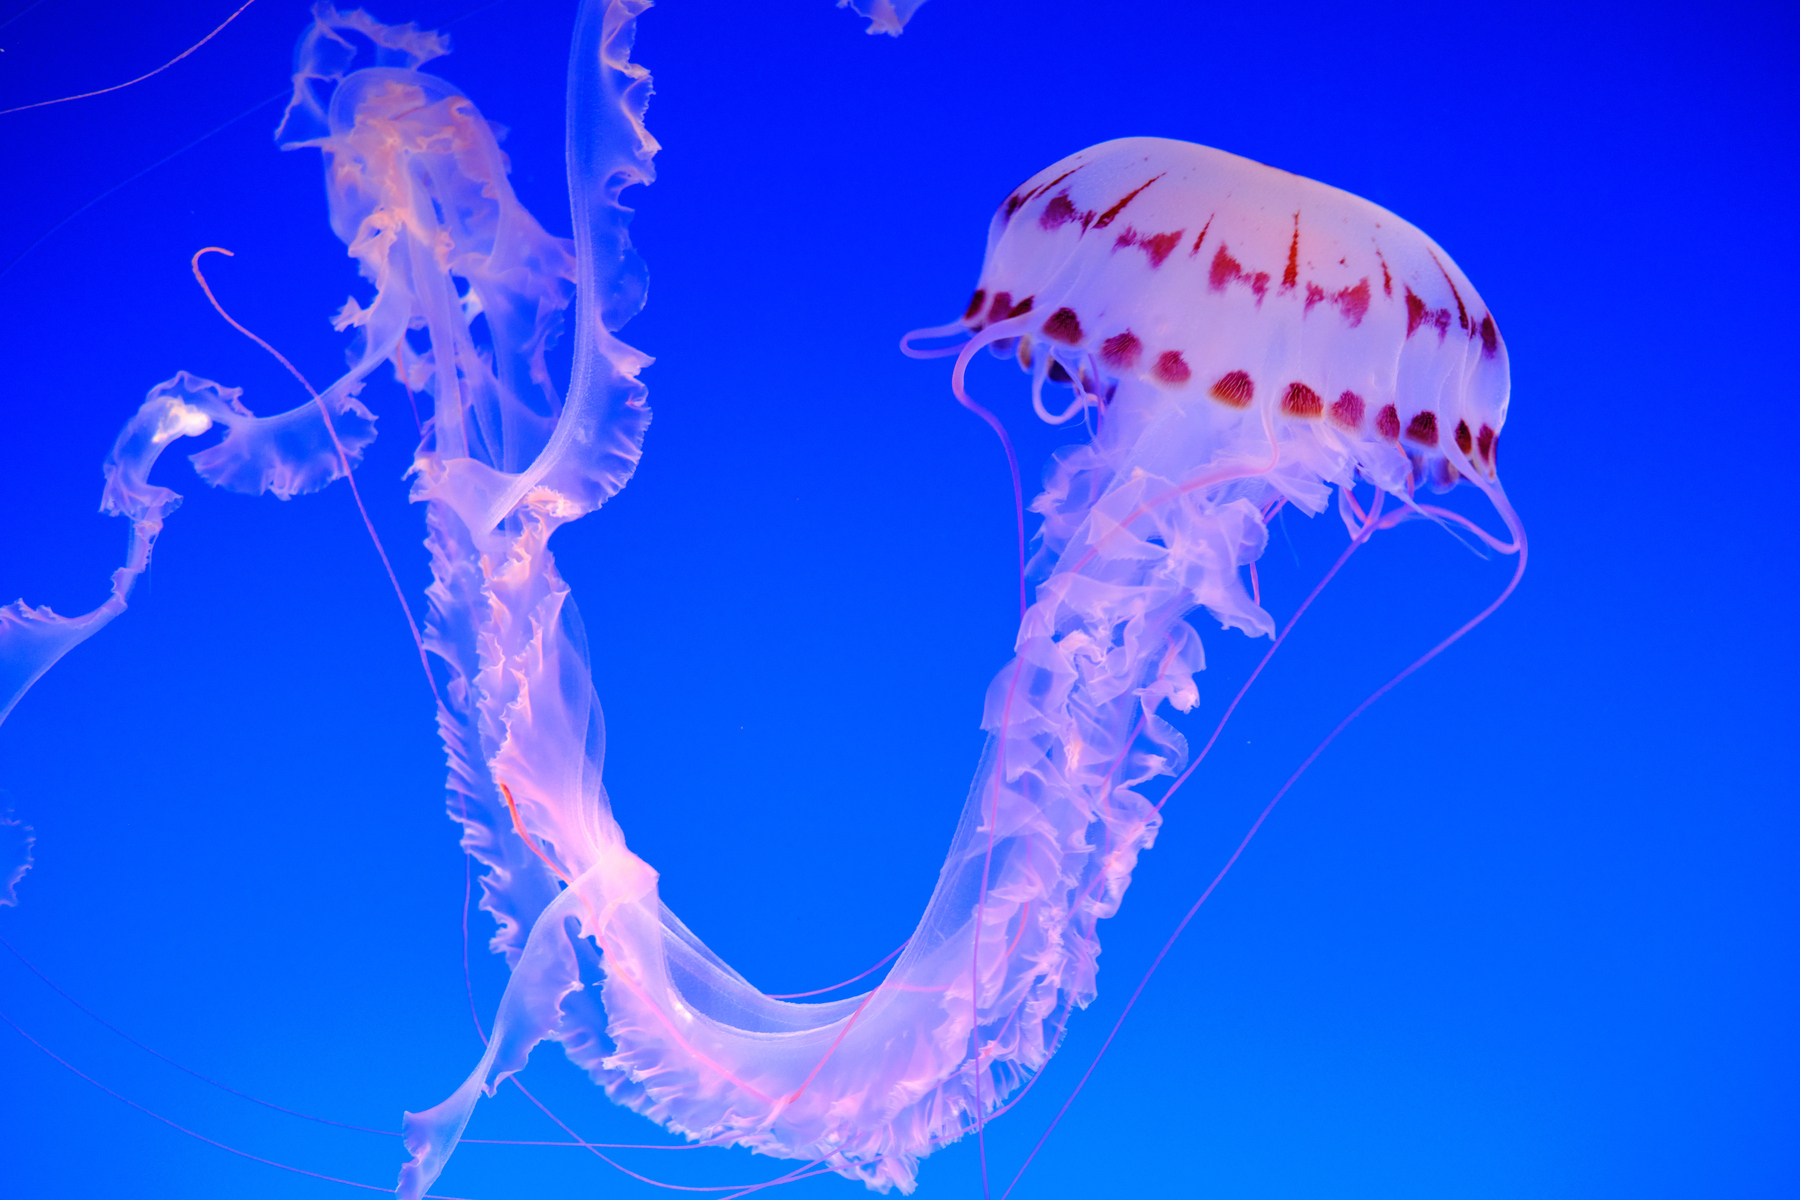 A single jellyfish positioned in a u-shape and taking up the middle of the frame.